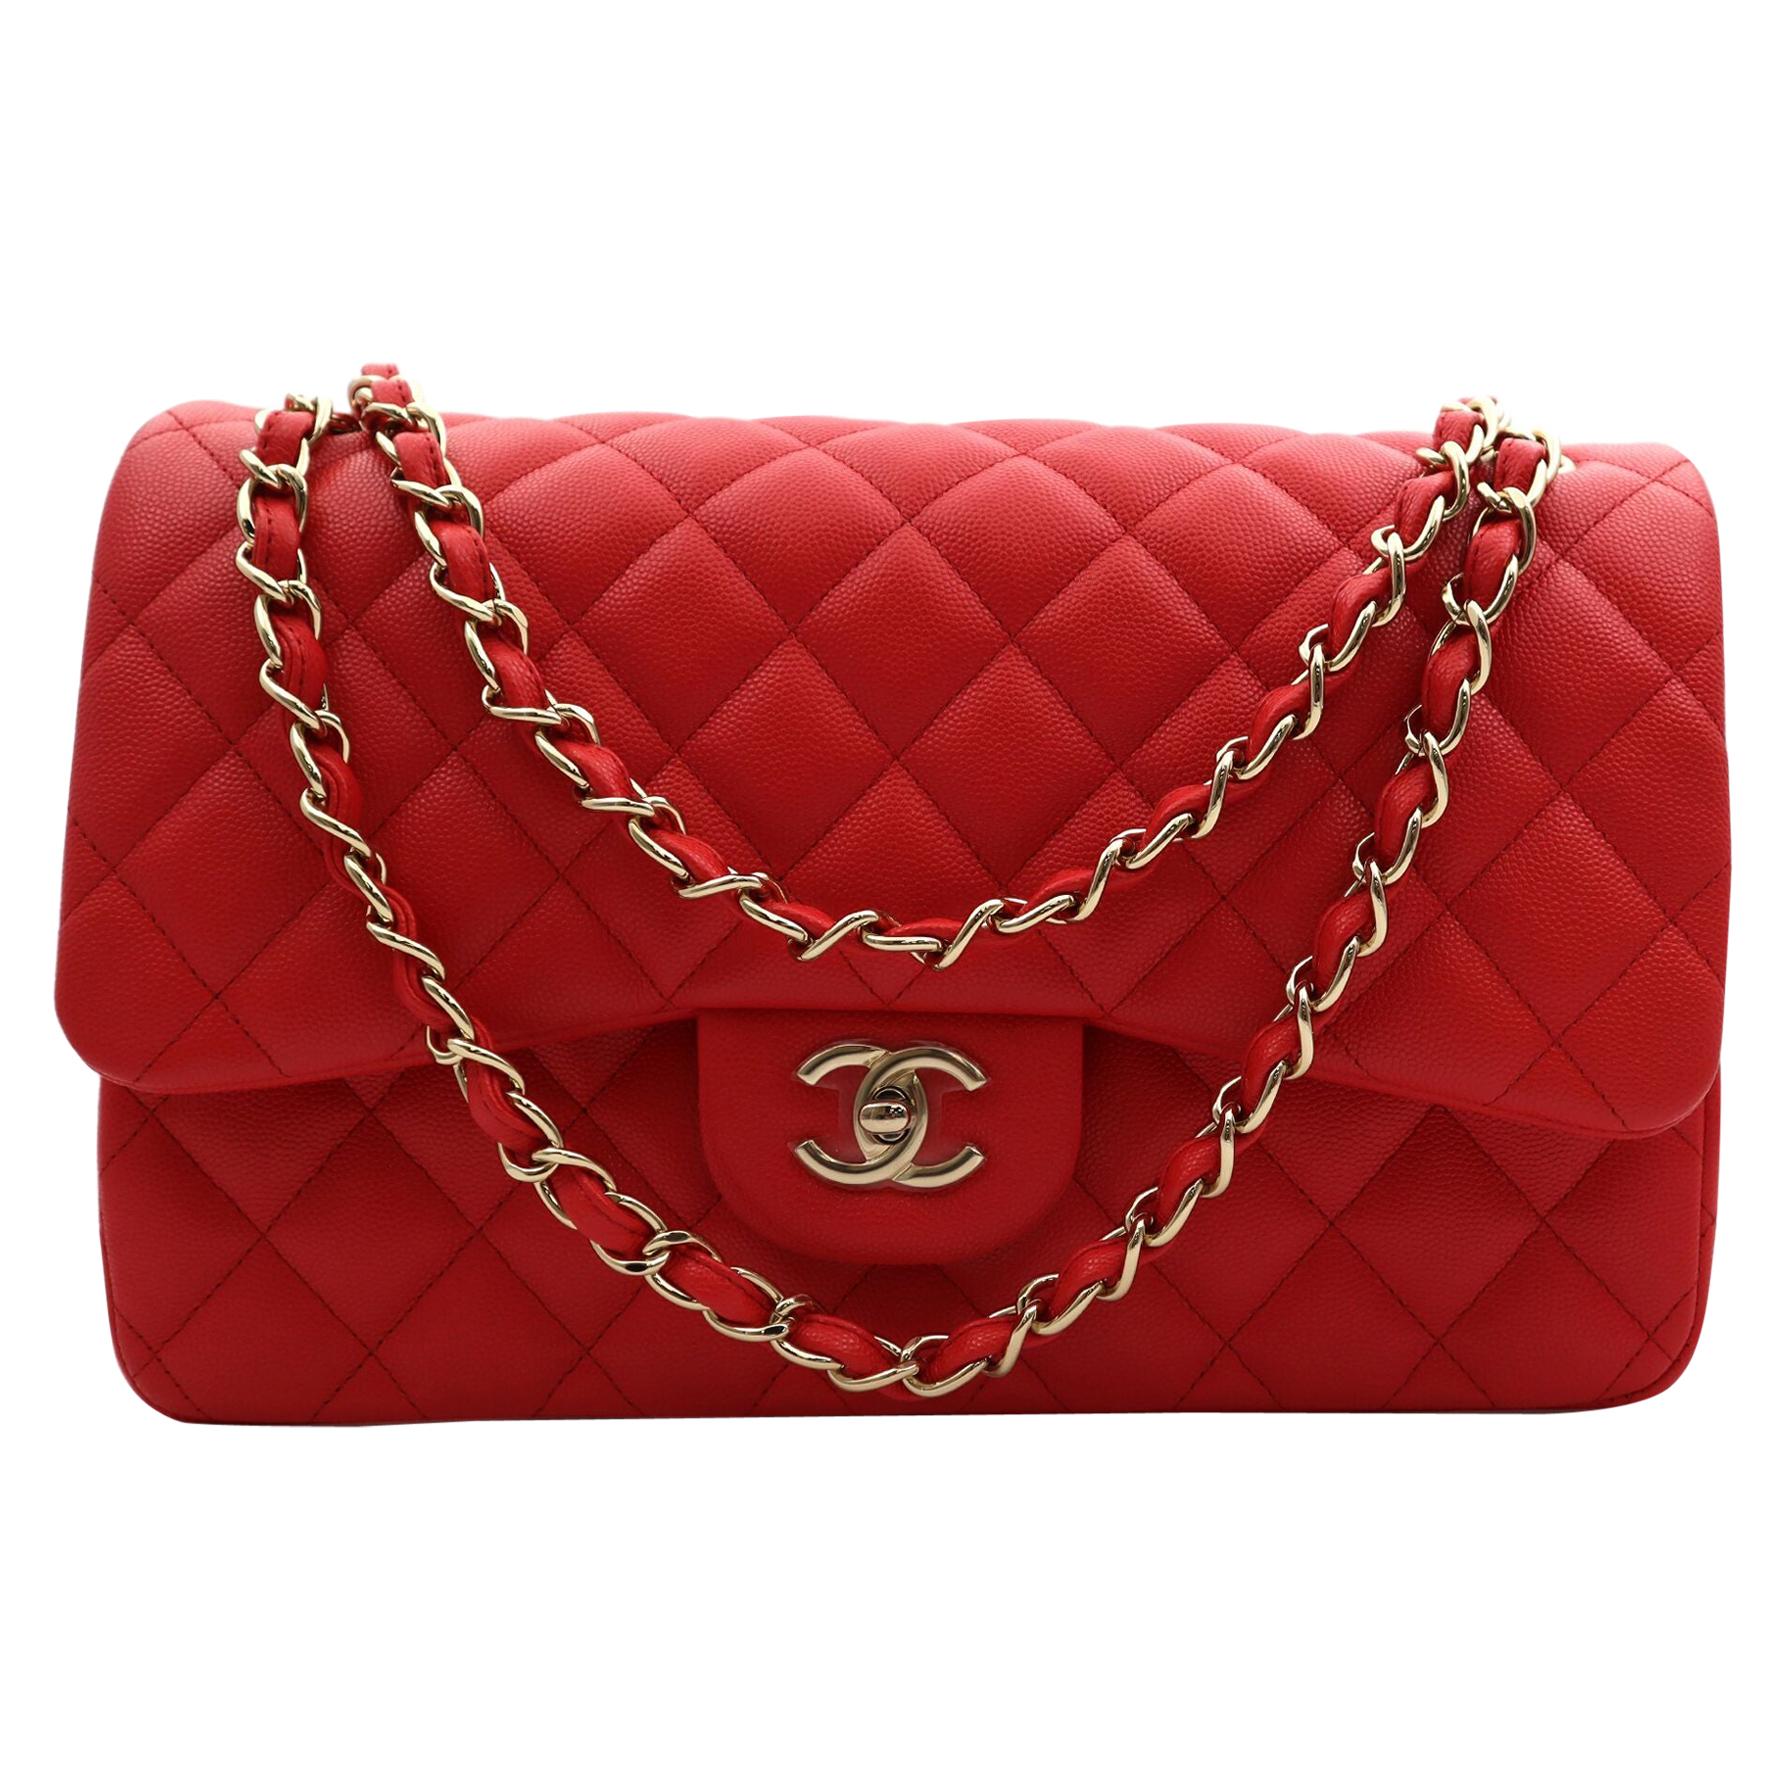 Chanel Classic Large Coral Red Quilted Caviar Leather Double Flap Bag A58600 